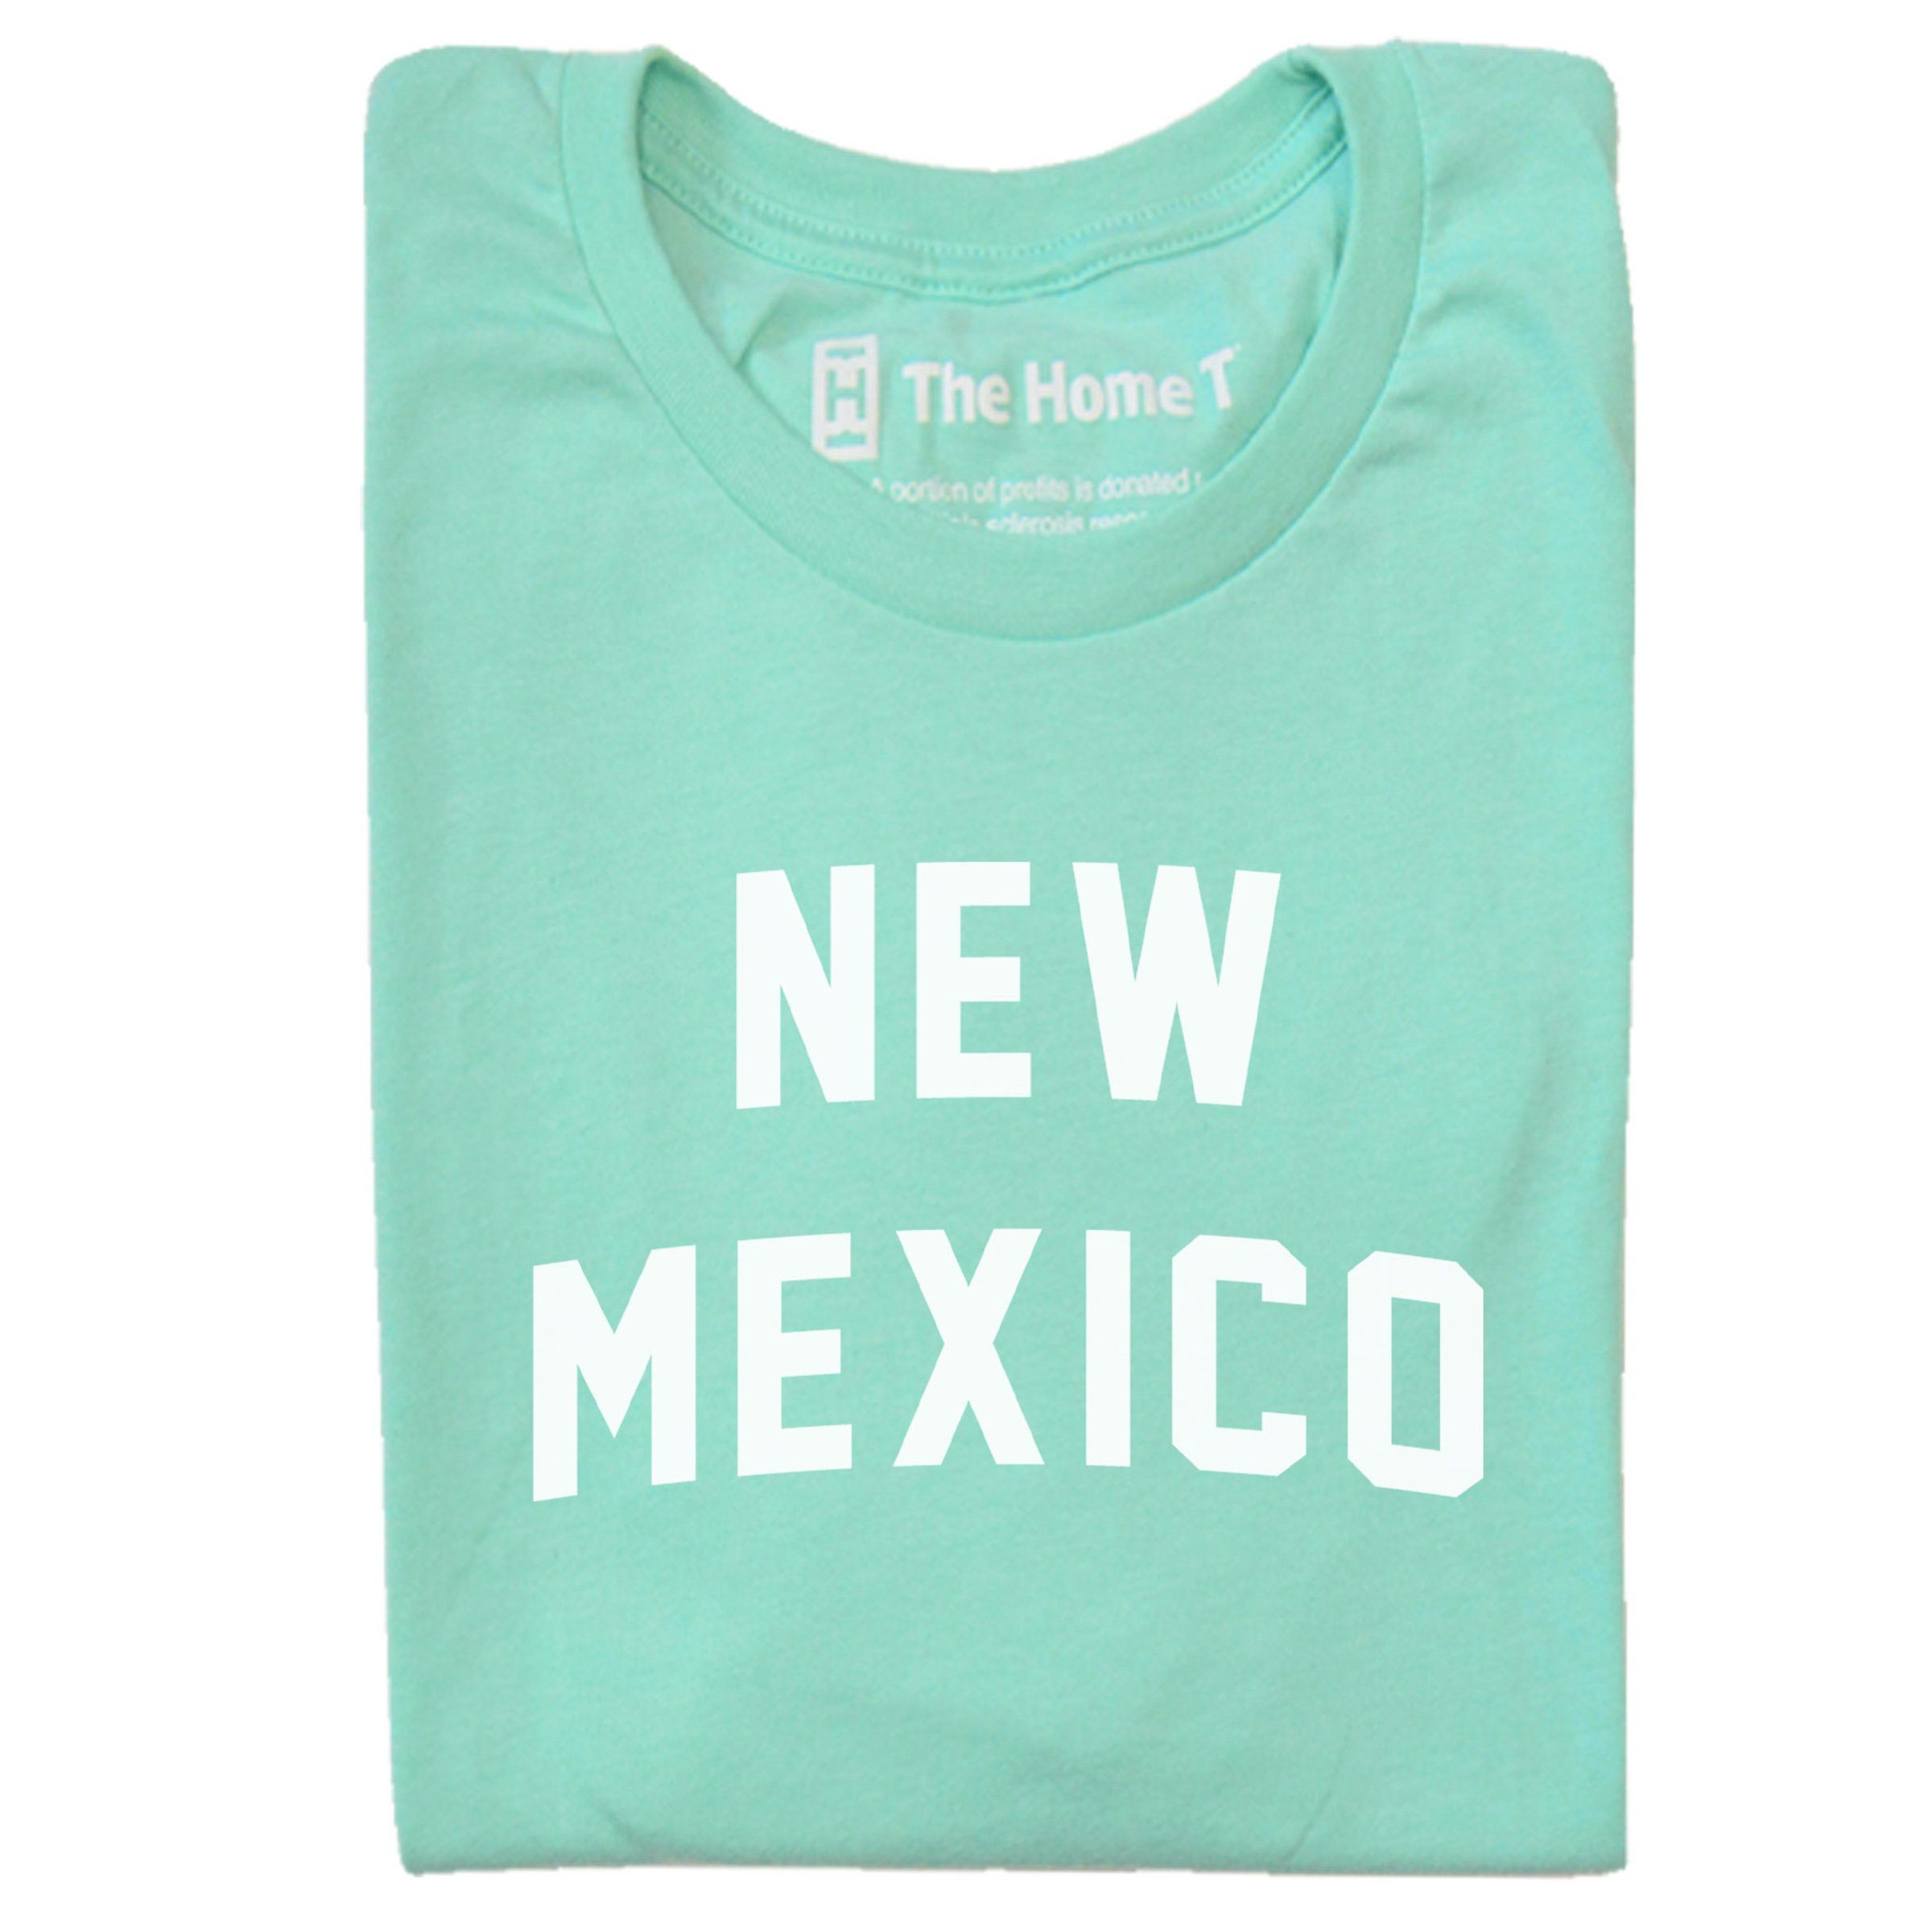 New Mexico Arched The Home T XS Mint